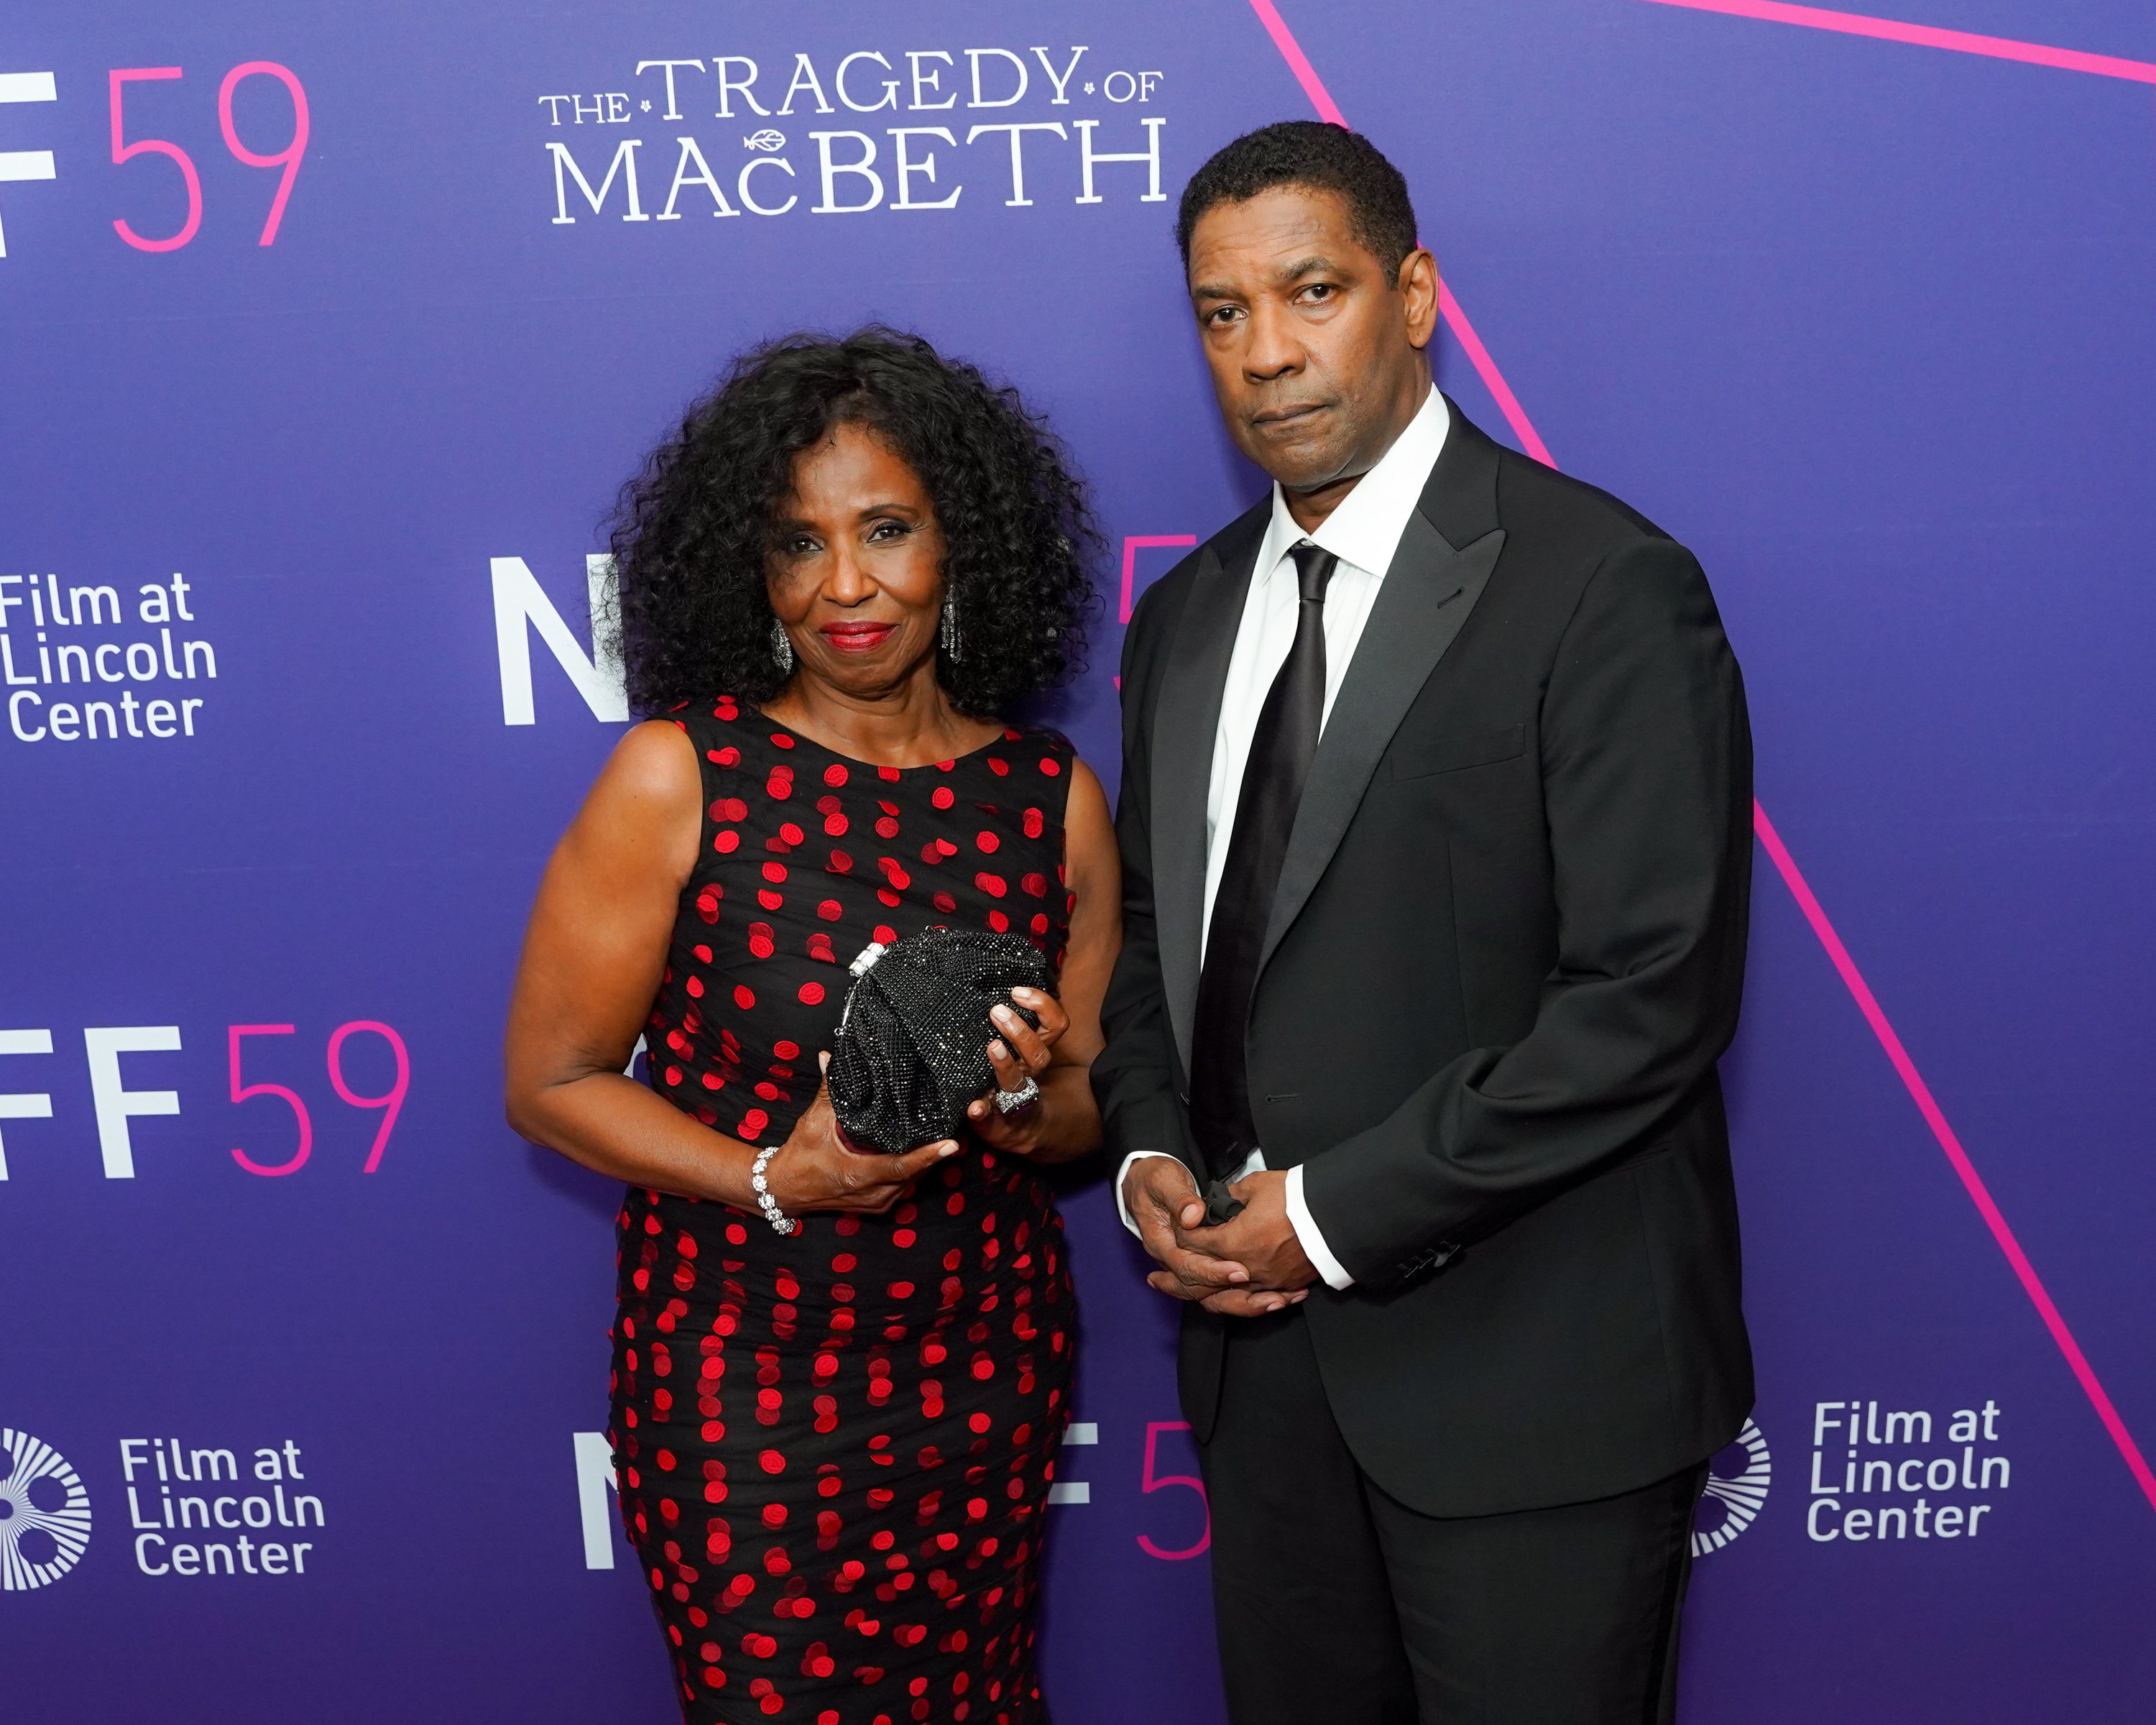 Pauletta Washington and Denzel Washington at The 59th New York Film Festival Opening Night - The Tragedy Of Macbeth at Alice Tully Hall, Lincoln Center on September 24, 2021 in New York City. | Source: Getty Images